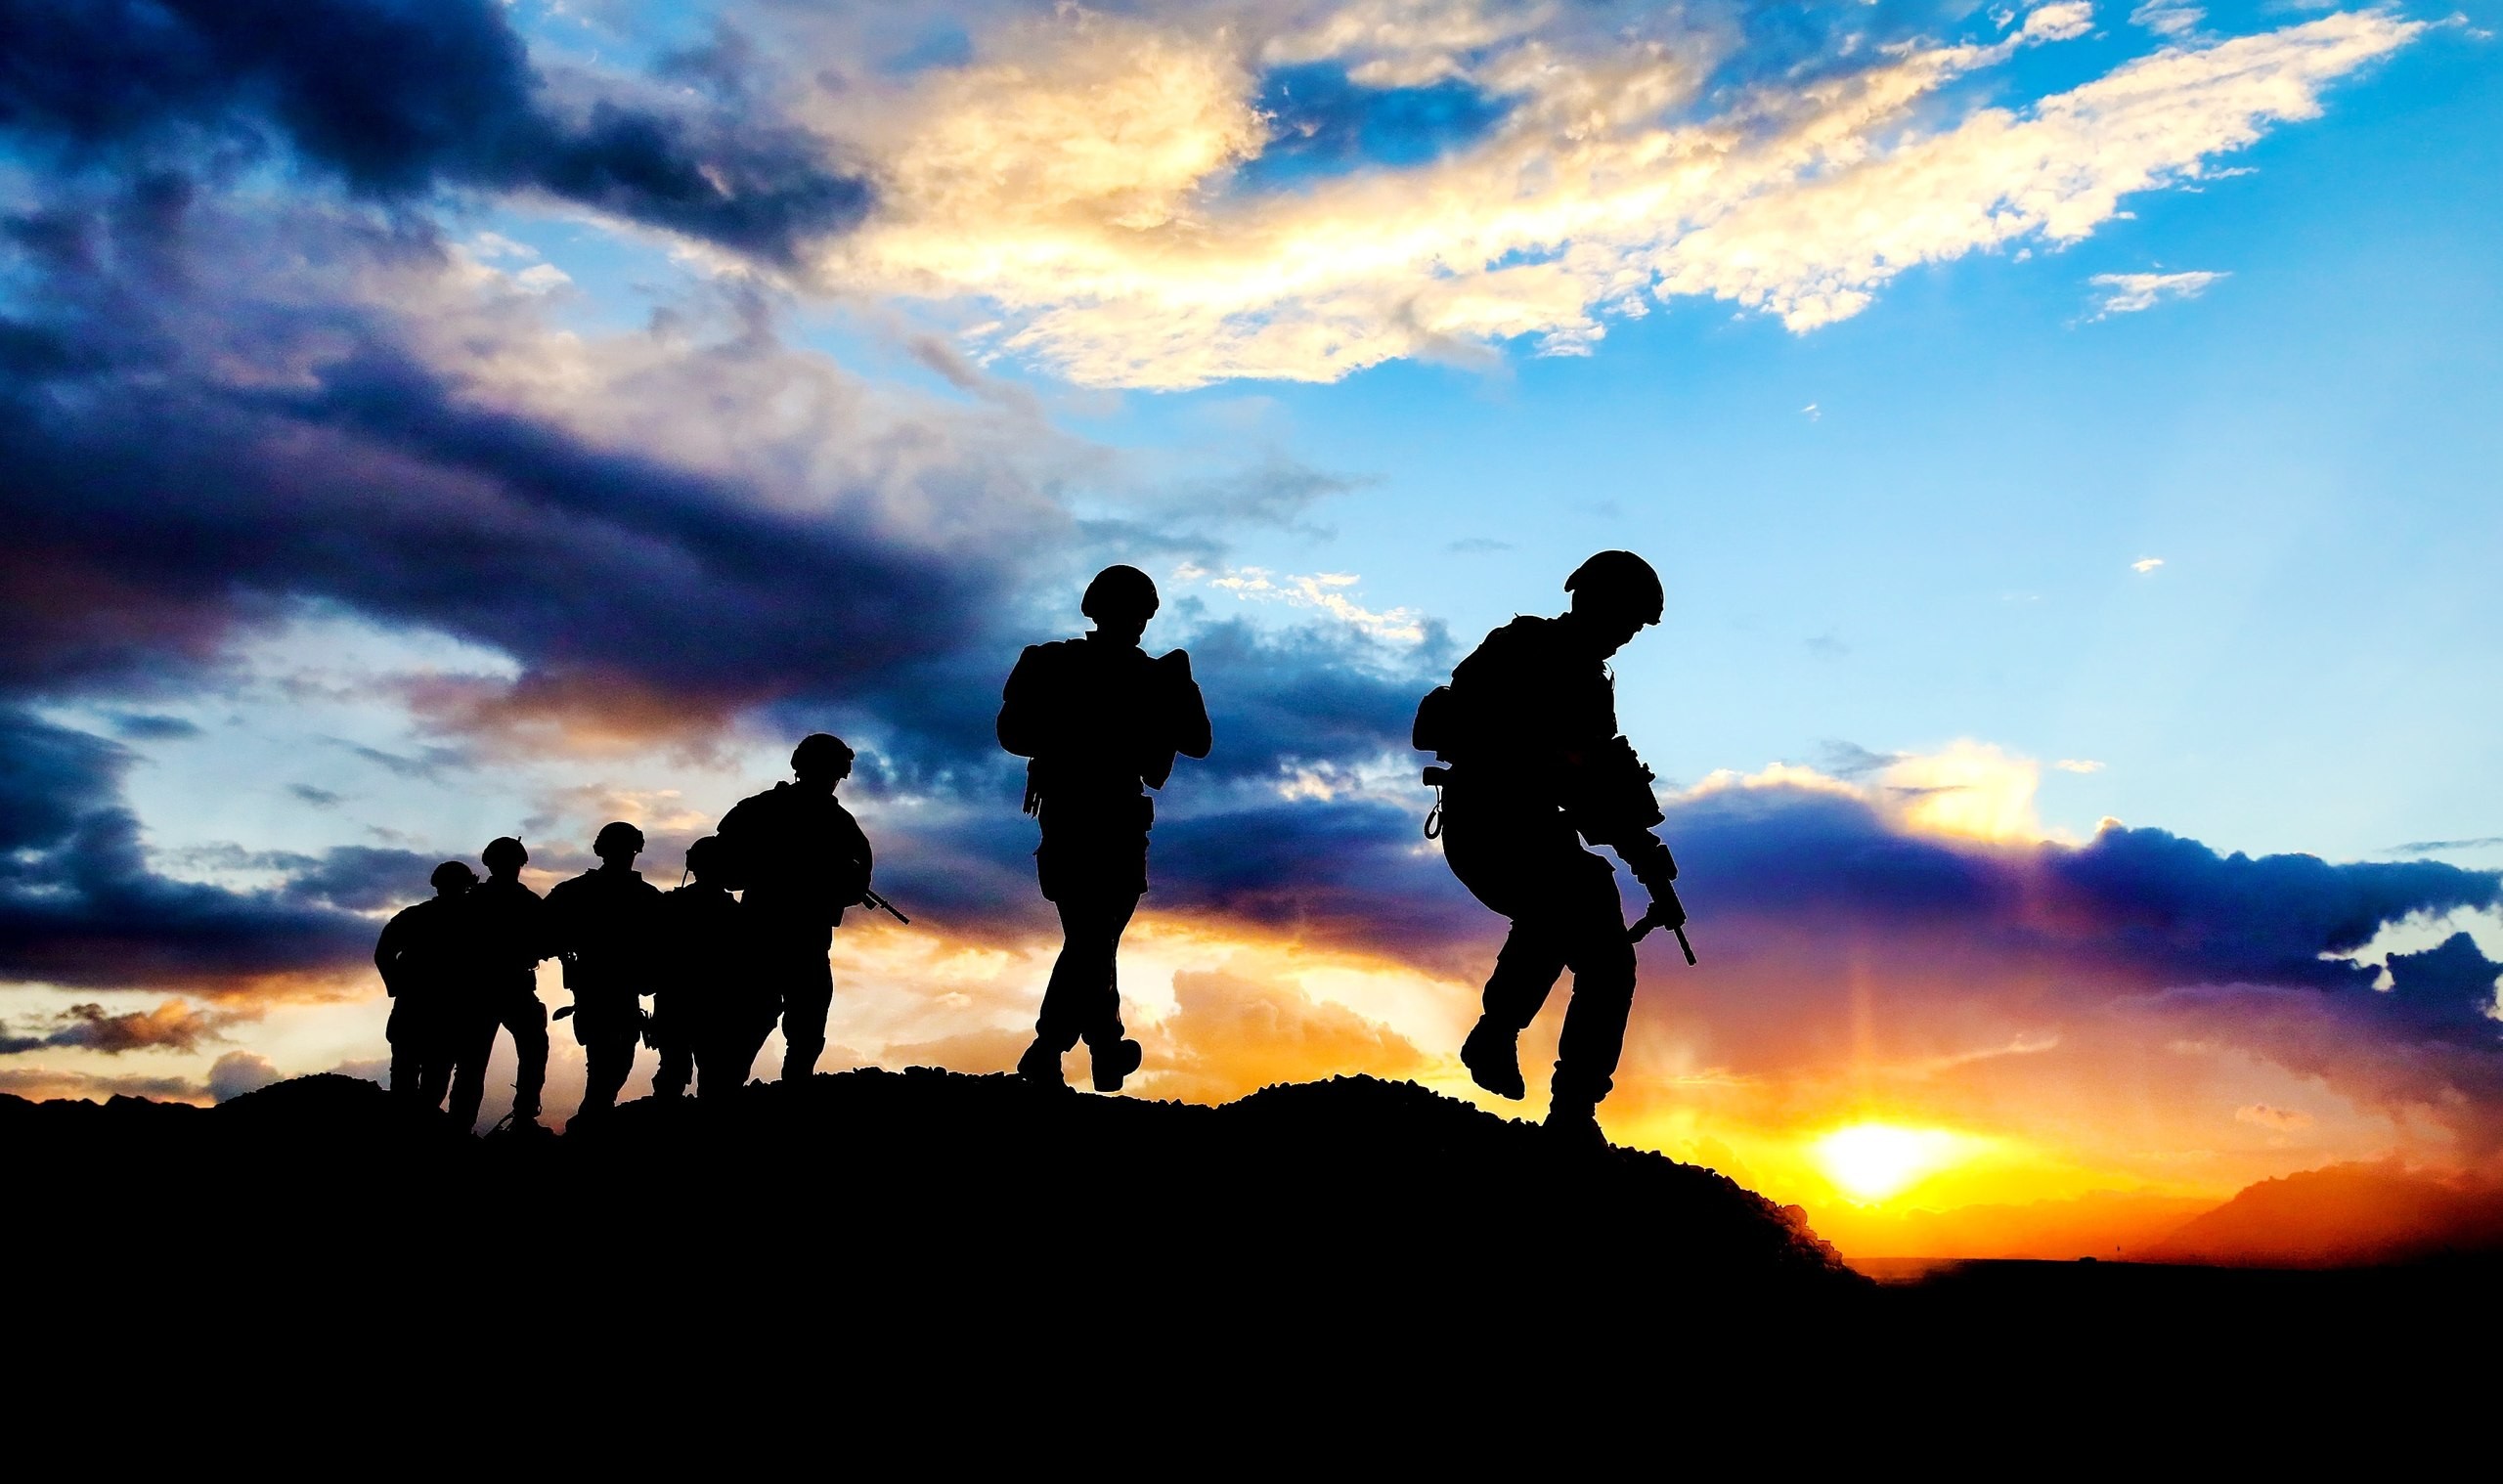 People 2560x1518 people soldier sunset silhouette military men outdoors sky sunlight